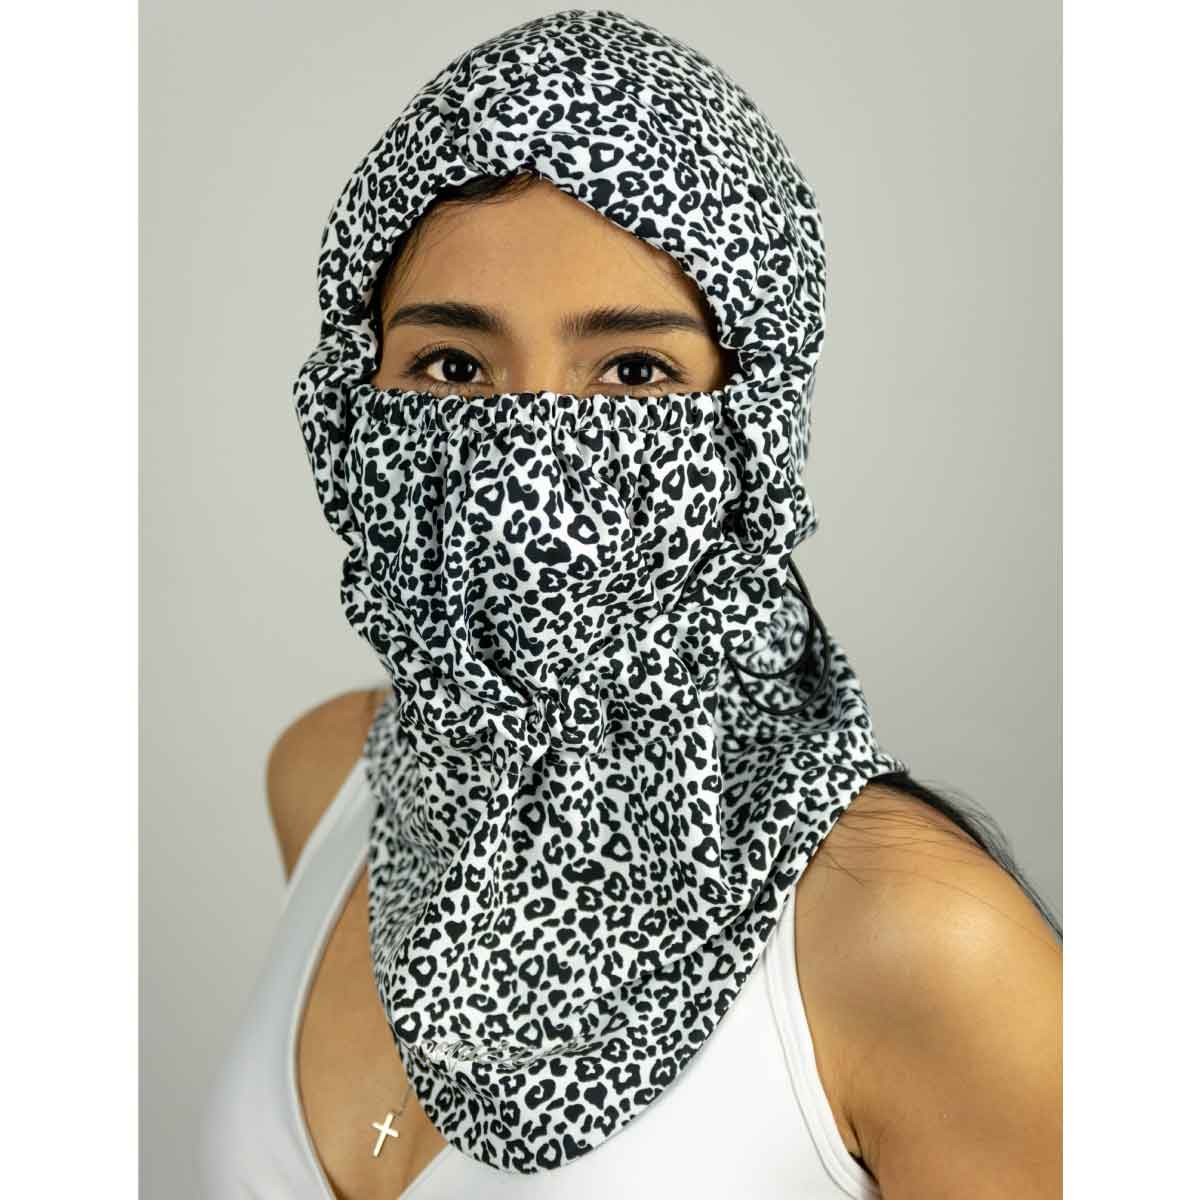 PROTECTIVE ANIMAL PRINT BLACK HOODIE - FACE MASK INCLUDED